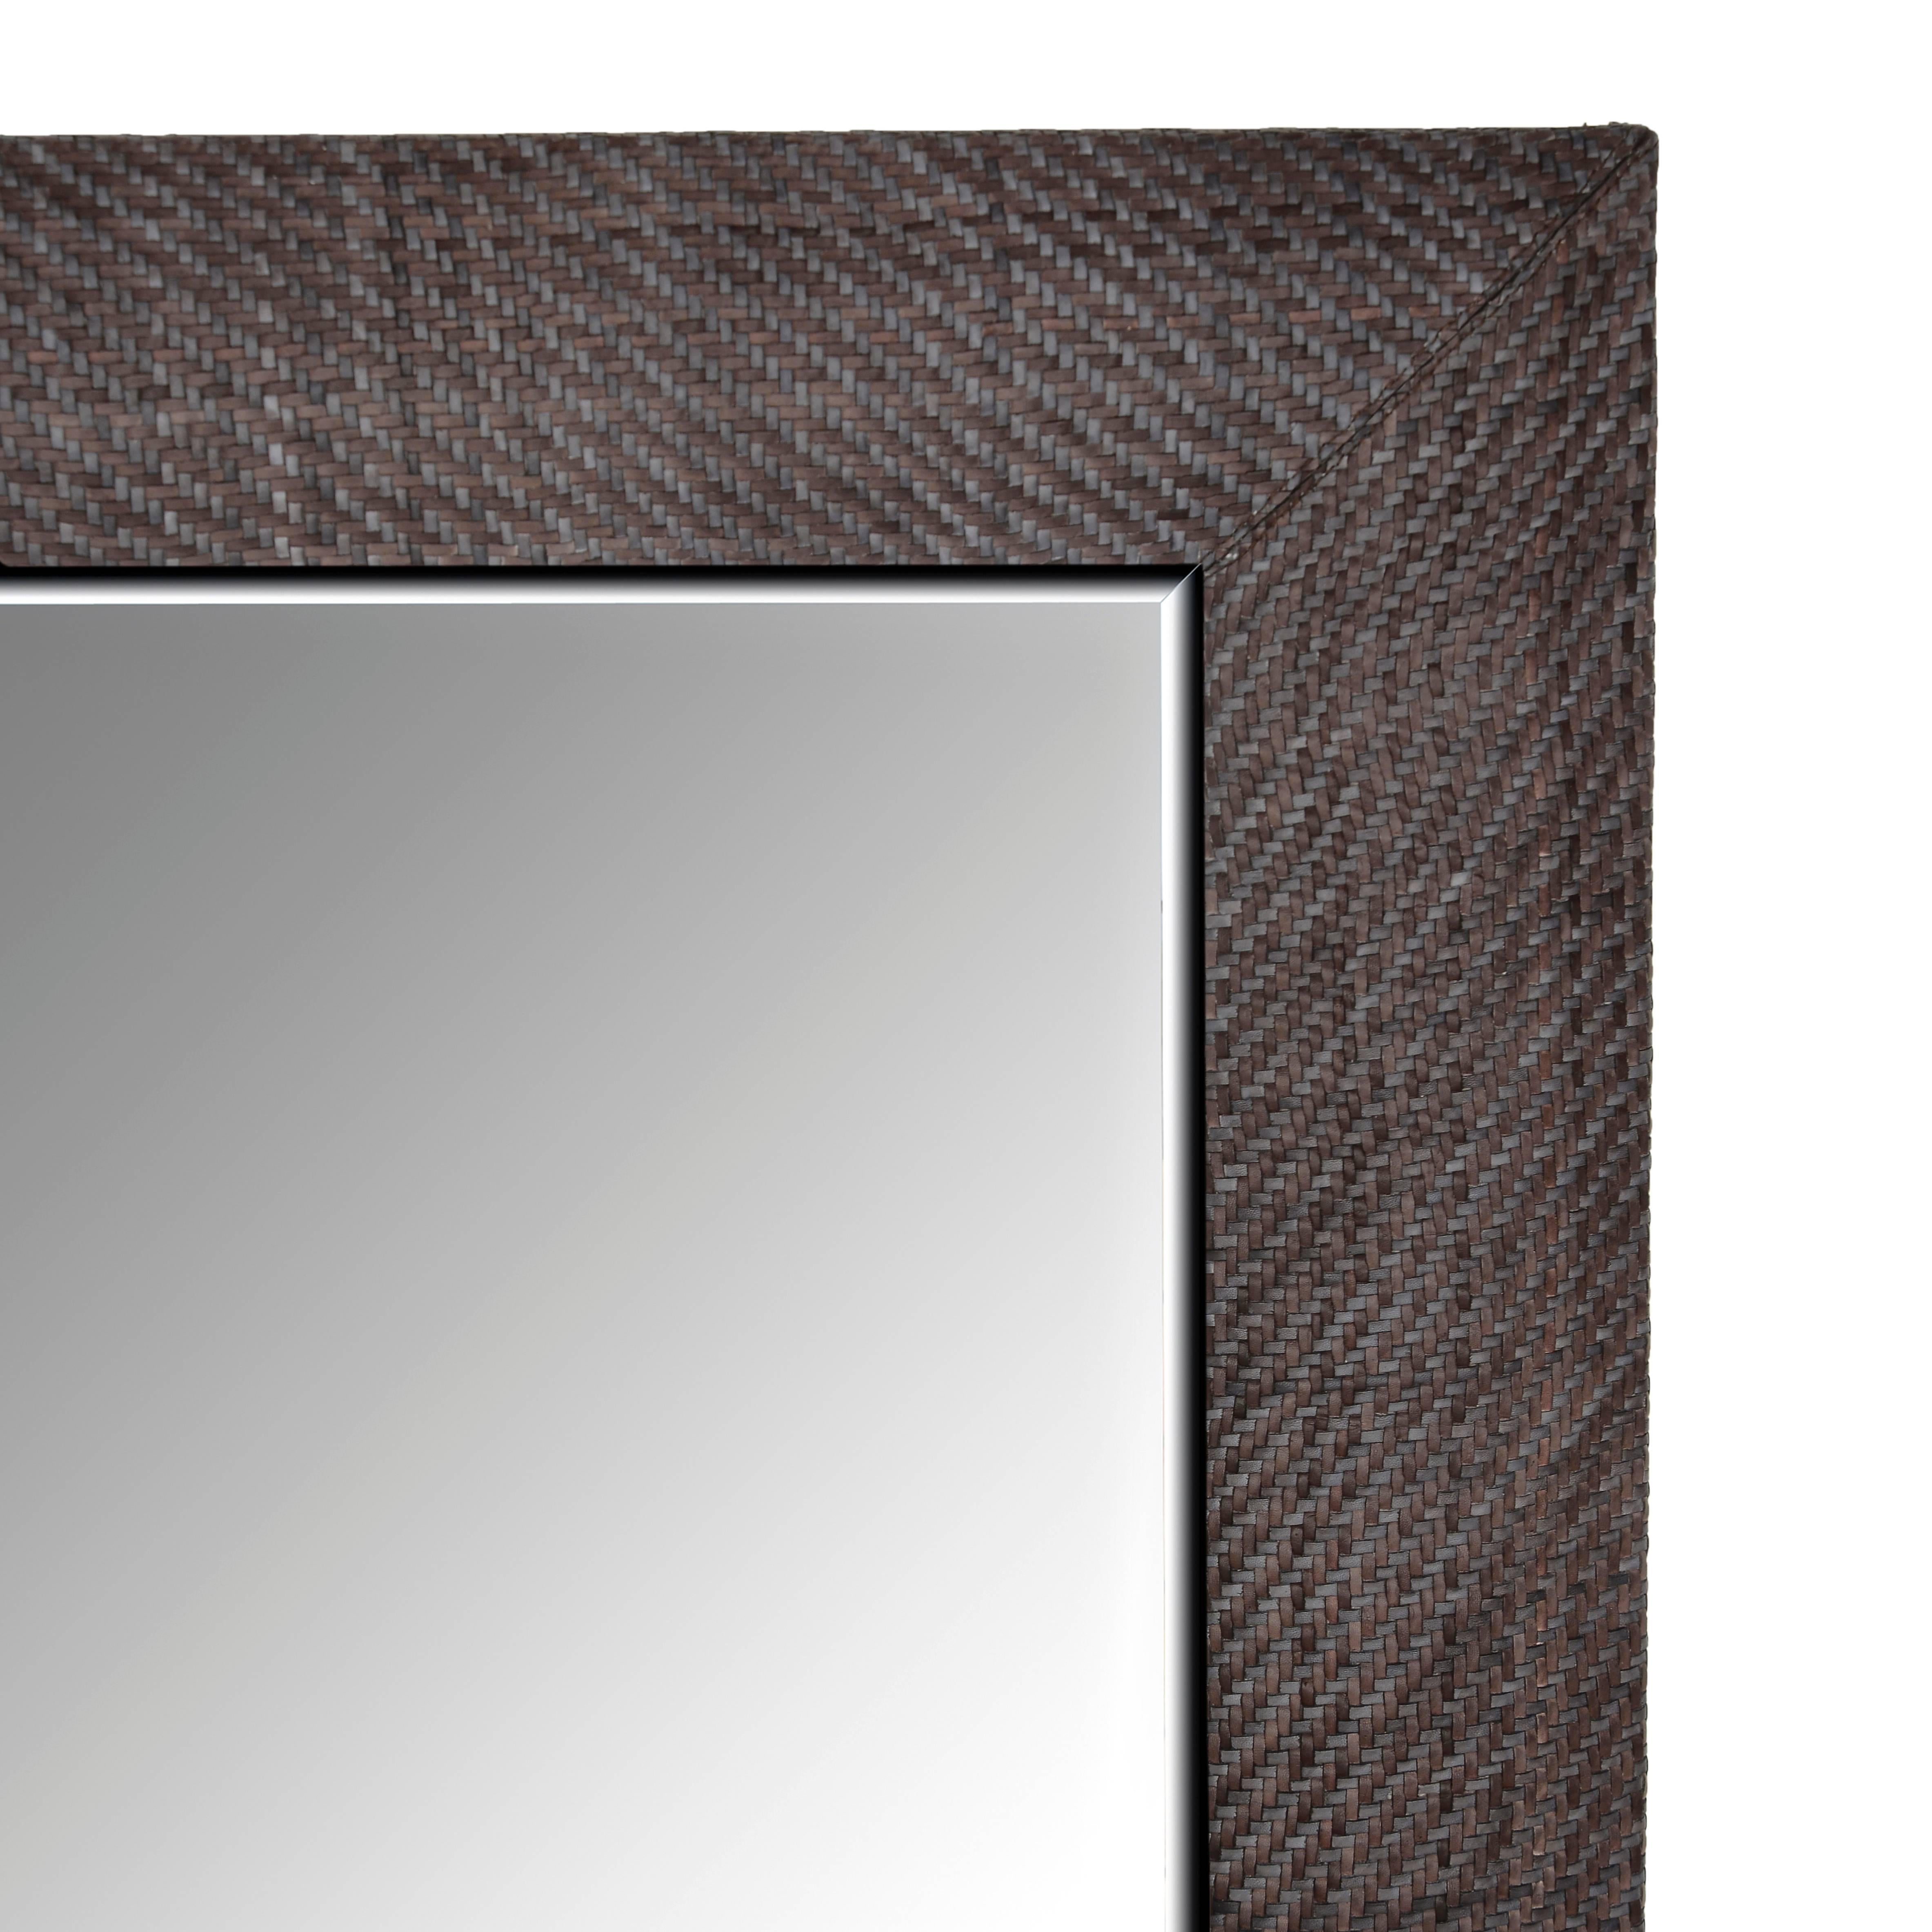 Hand-woven denim weave leather framed mirror in London storm grey.

Measures 28 x 32